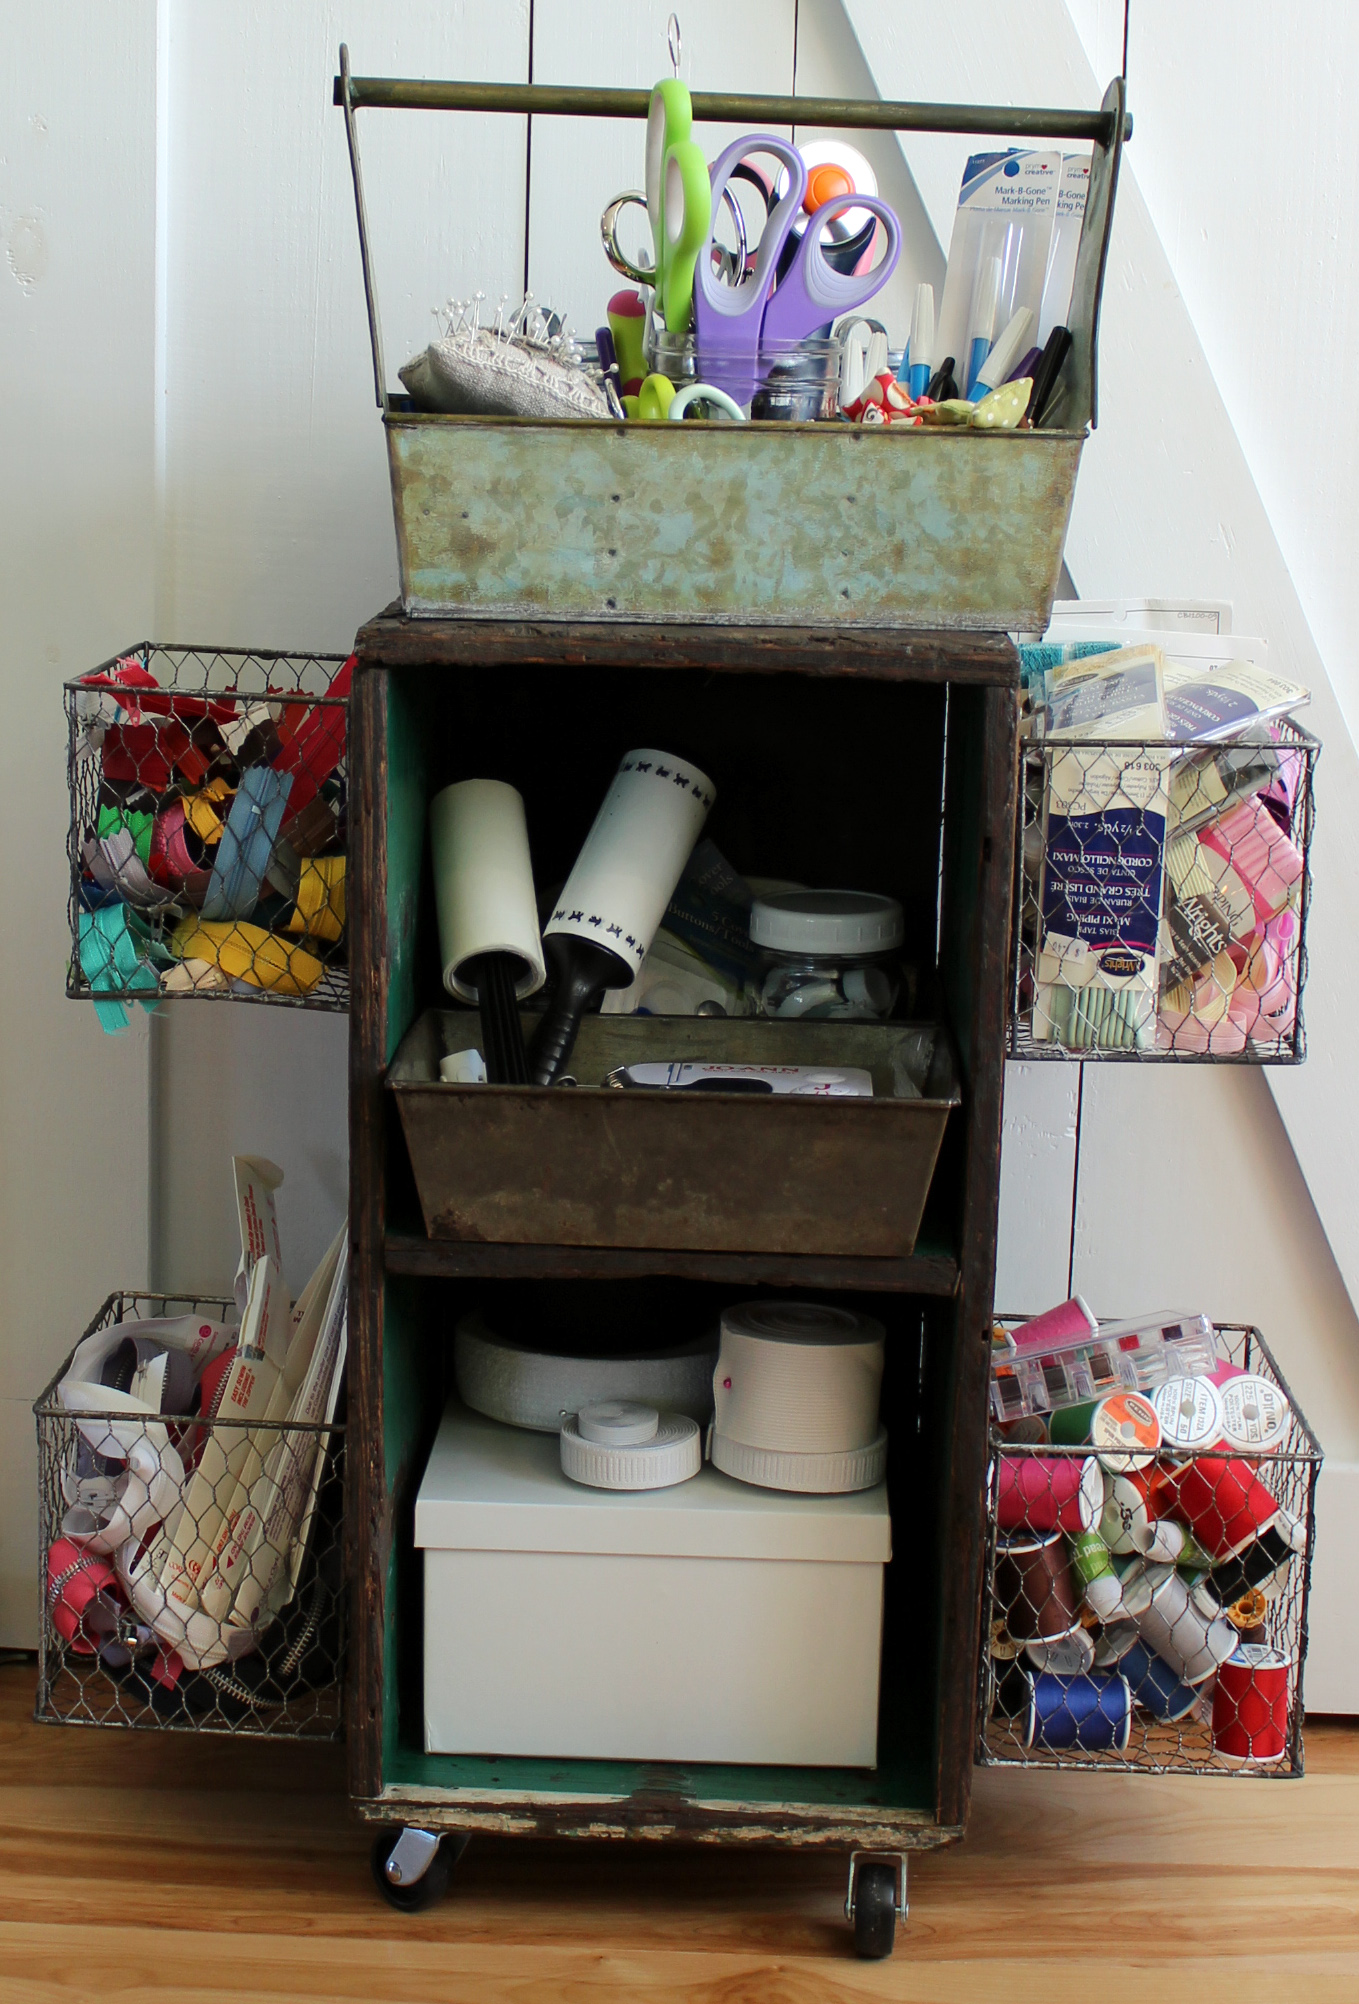 How to make a sewing caddy